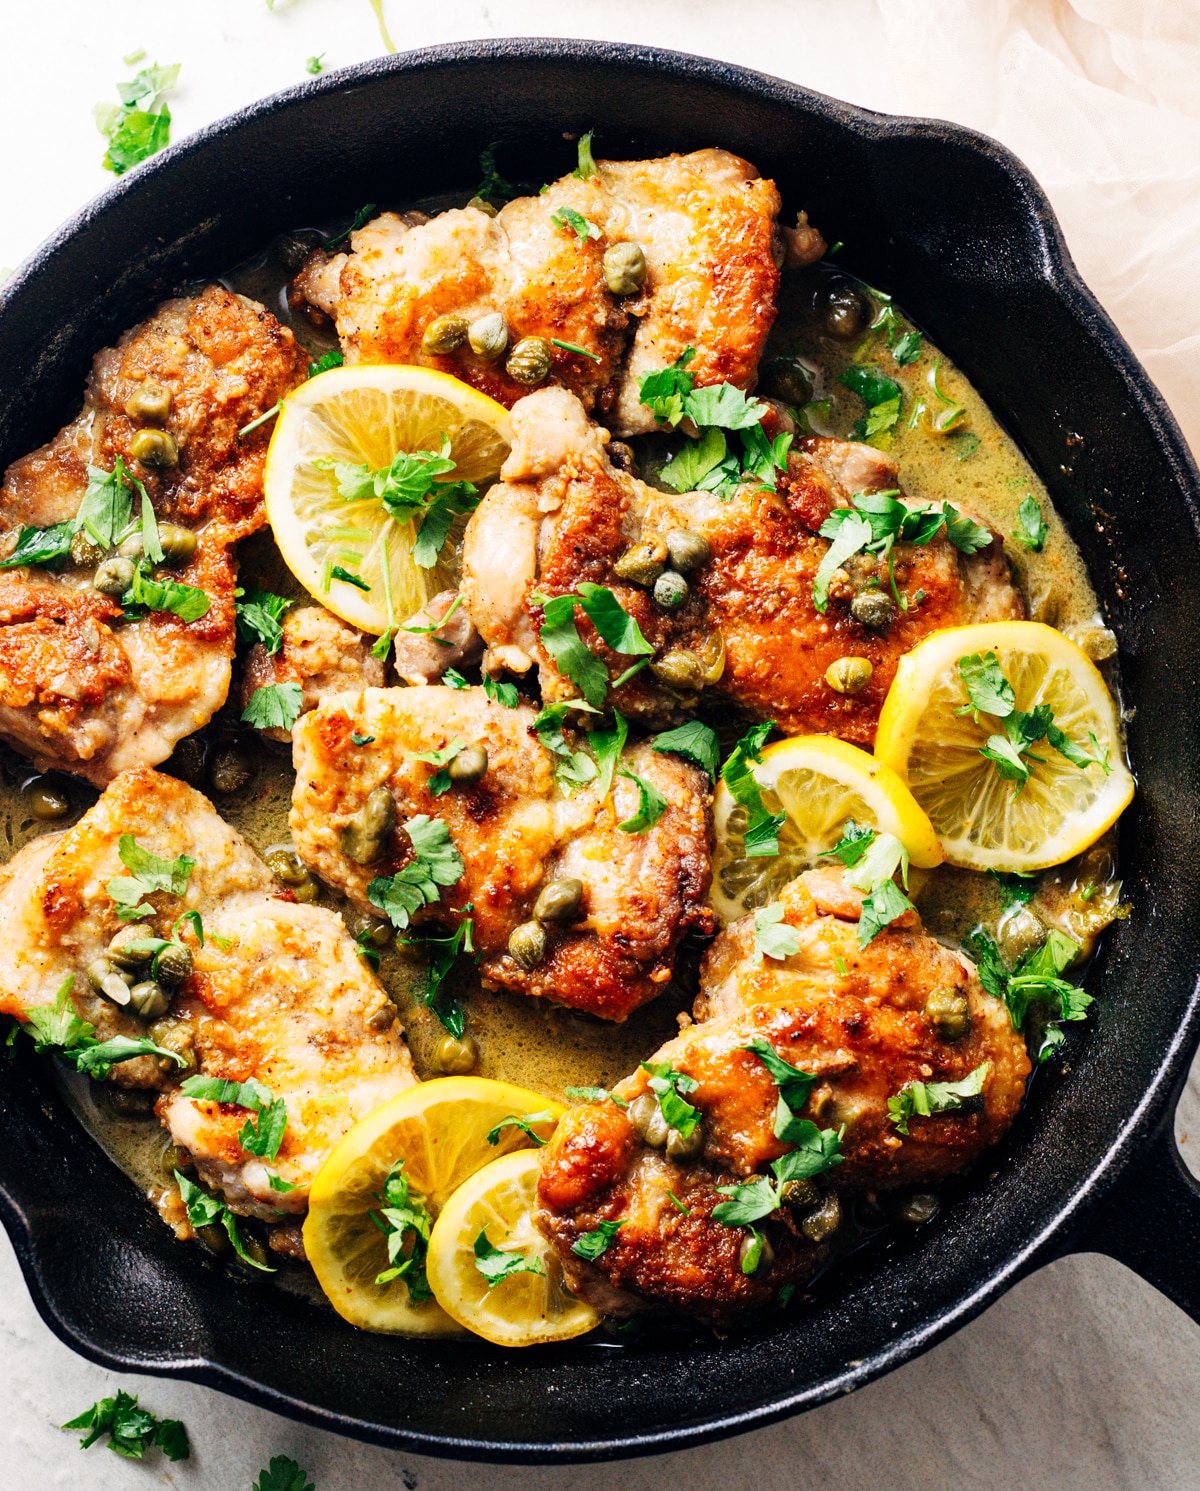 Chicken thighs, lemon slices, and capers in a cast iron pan.